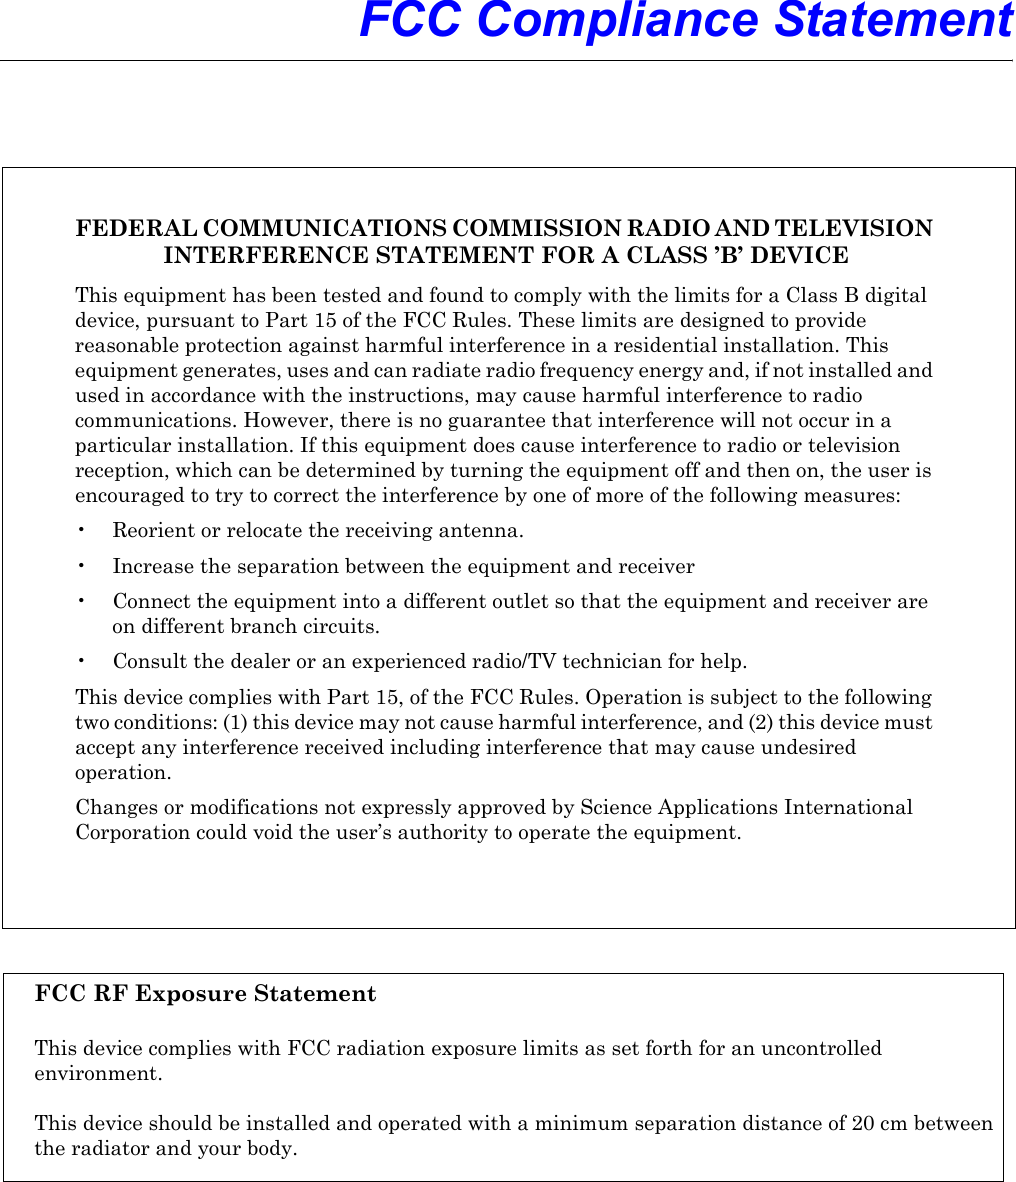  FCC Compliance StatementFEDERAL COMMUNICATIONS COMMISSION RADIO AND TELEVISION INTERFERENCE STATEMENT FOR A CLASS ’B’ DEVICEThis equipment has been tested and found to comply with the limits for a Class B digital device, pursuant to Part 15 of the FCC Rules. These limits are designed to provide reasonable protection against harmful interference in a residential installation. This equipment generates, uses and can radiate radio frequency energy and, if not installed and used in accordance with the instructions, may cause harmful interference to radio communications. However, there is no guarantee that interference will not occur in a particular installation. If this equipment does cause interference to radio or television reception, which can be determined by turning the equipment off and then on, the user is encouraged to try to correct the interference by one of more of the following measures:• Reorient or relocate the receiving antenna.• Increase the separation between the equipment and receiver• Connect the equipment into a different outlet so that the equipment and receiver areon different branch circuits.• Consult the dealer or an experienced radio/TV technician for help.This device complies with Part 15, of the FCC Rules. Operation is subject to the following two conditions: (1) this device may not cause harmful interference, and (2) this device must accept any interference received including interference that may cause undesired operation.Changes or modifications not expressly approved by Science Applications International Corporation could void the user’s authority to operate the equipment.FCC RF Exposure StatementThis device complies with FCC radiation exposure limits as set forth for an uncontrolledenvironment. This device should be installed and operated with a minimum separation distance of 20 cm betweenthe radiator and your body.